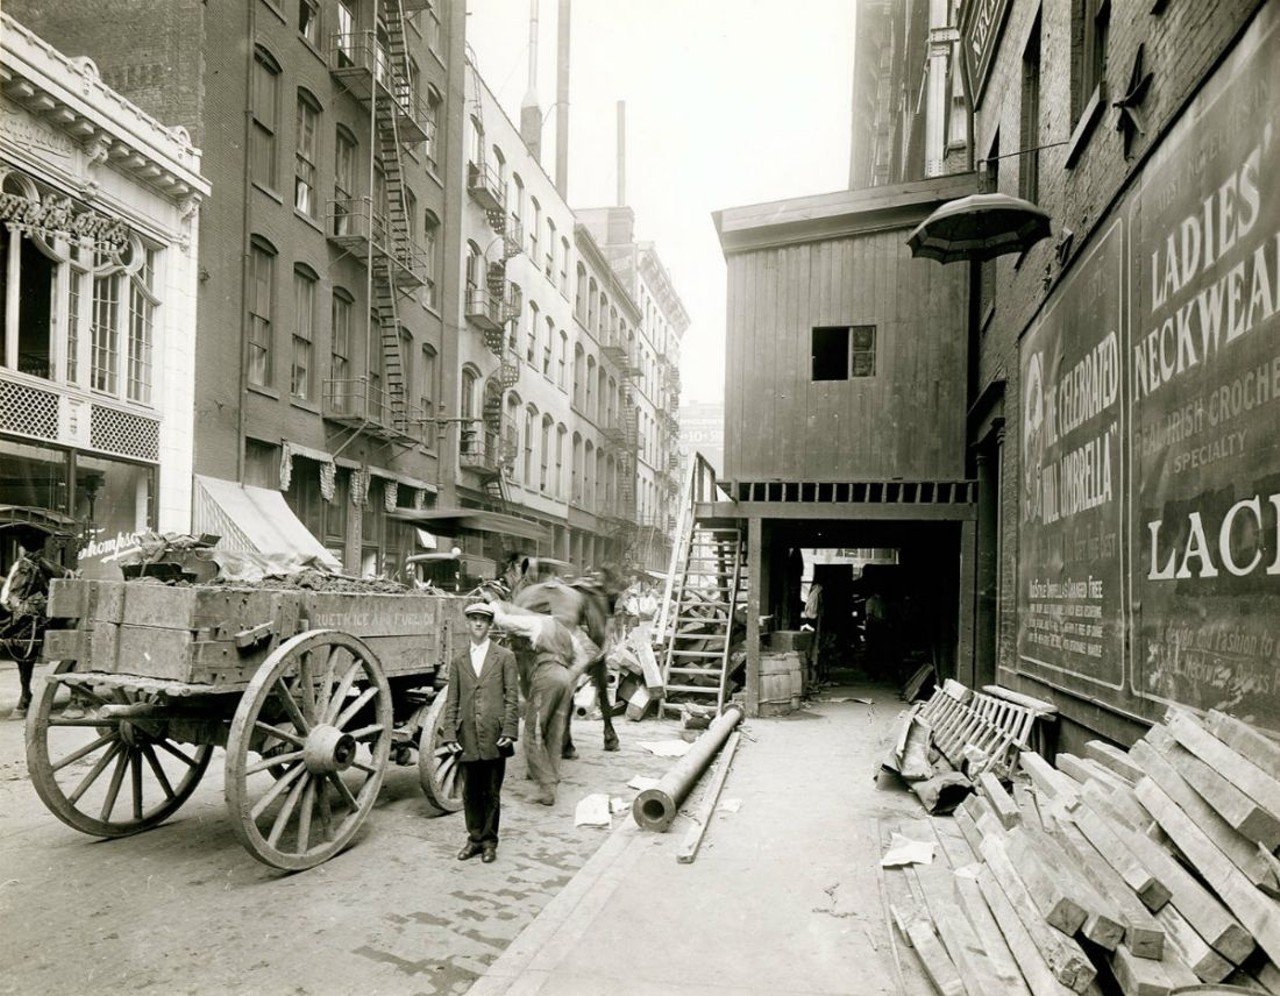 Construction work on St. Charles Street east of Seventh Street. Photograph, ca. 1900.